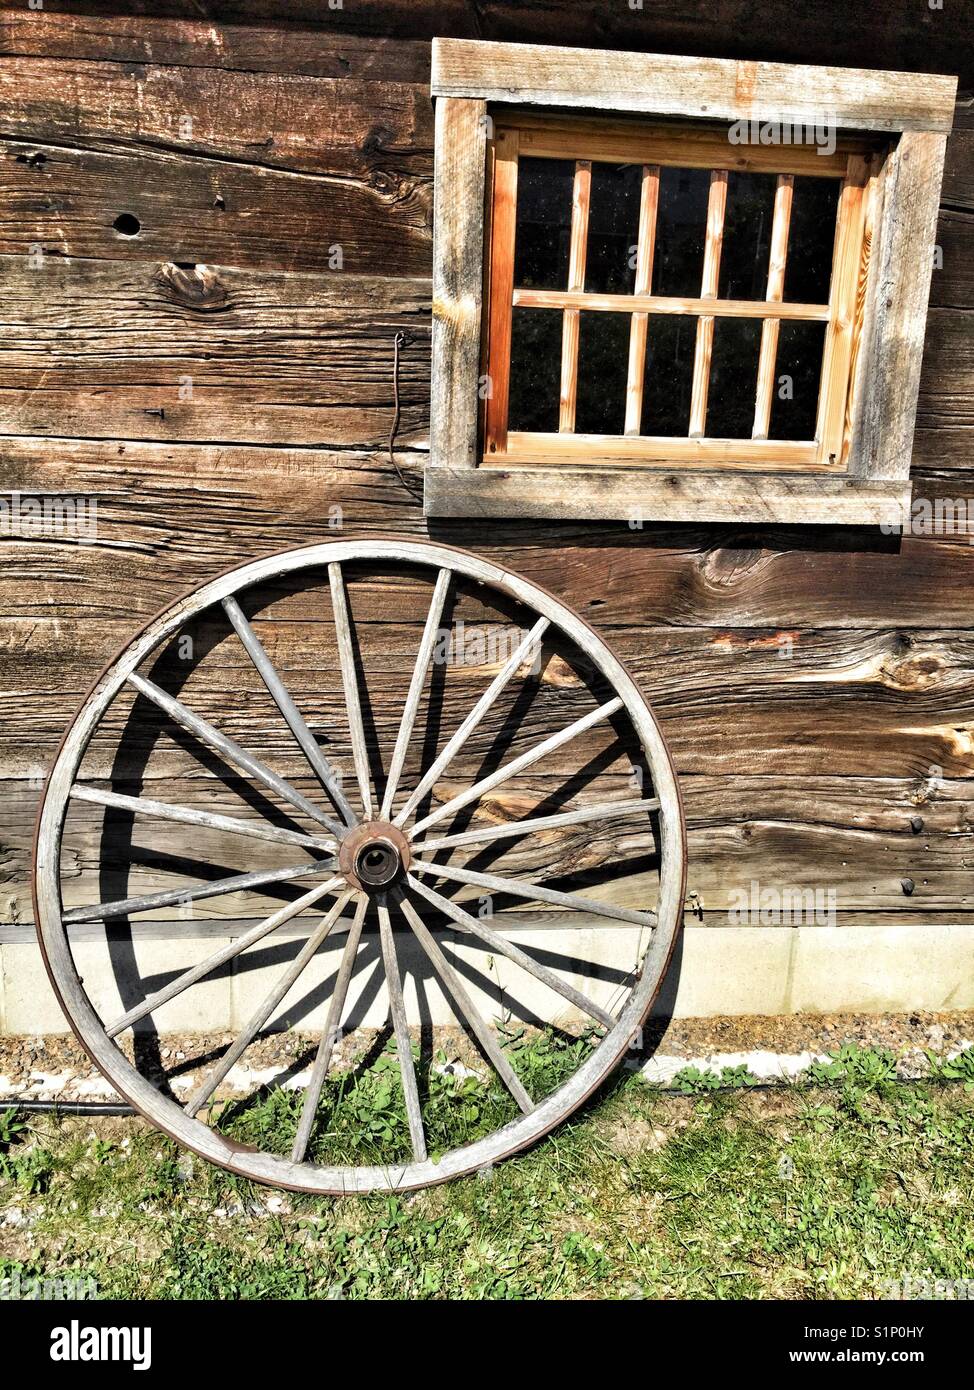 Wooden wagon wheel leaning against a log house. Stock Photo